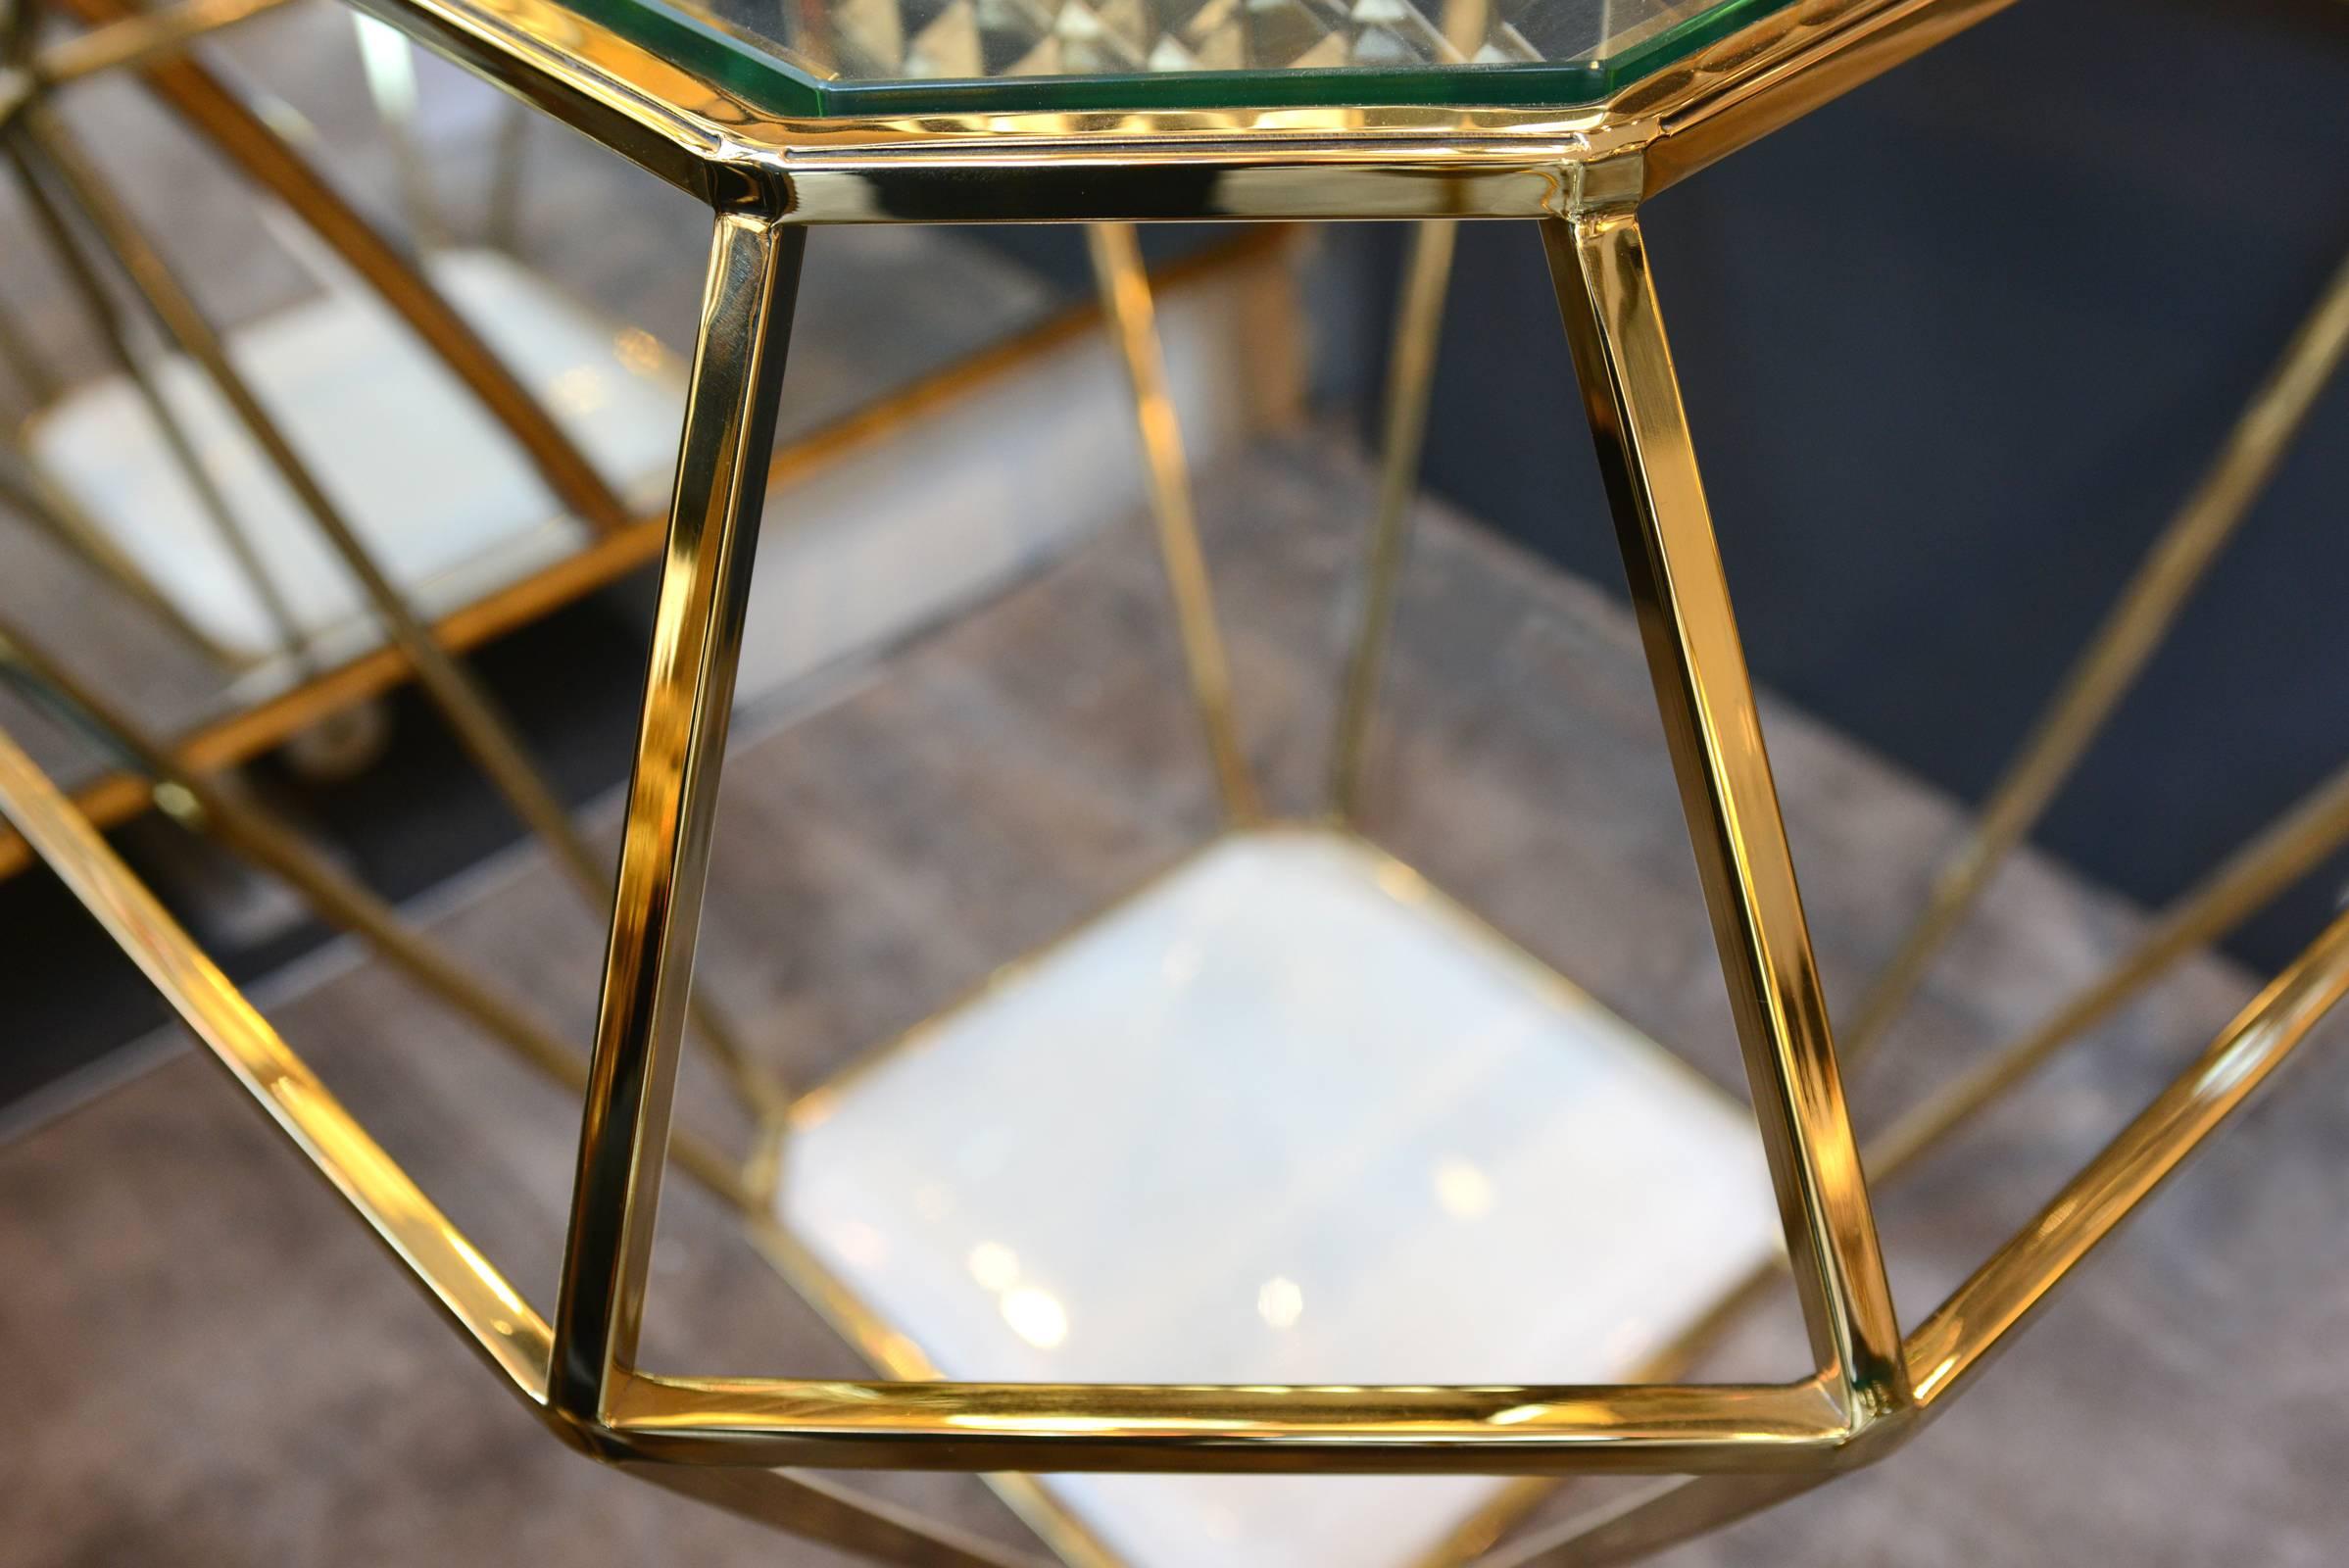 Contemporary Diamond Side Table in Gold Finish with Tempered Clear Glass Top and Marble Base